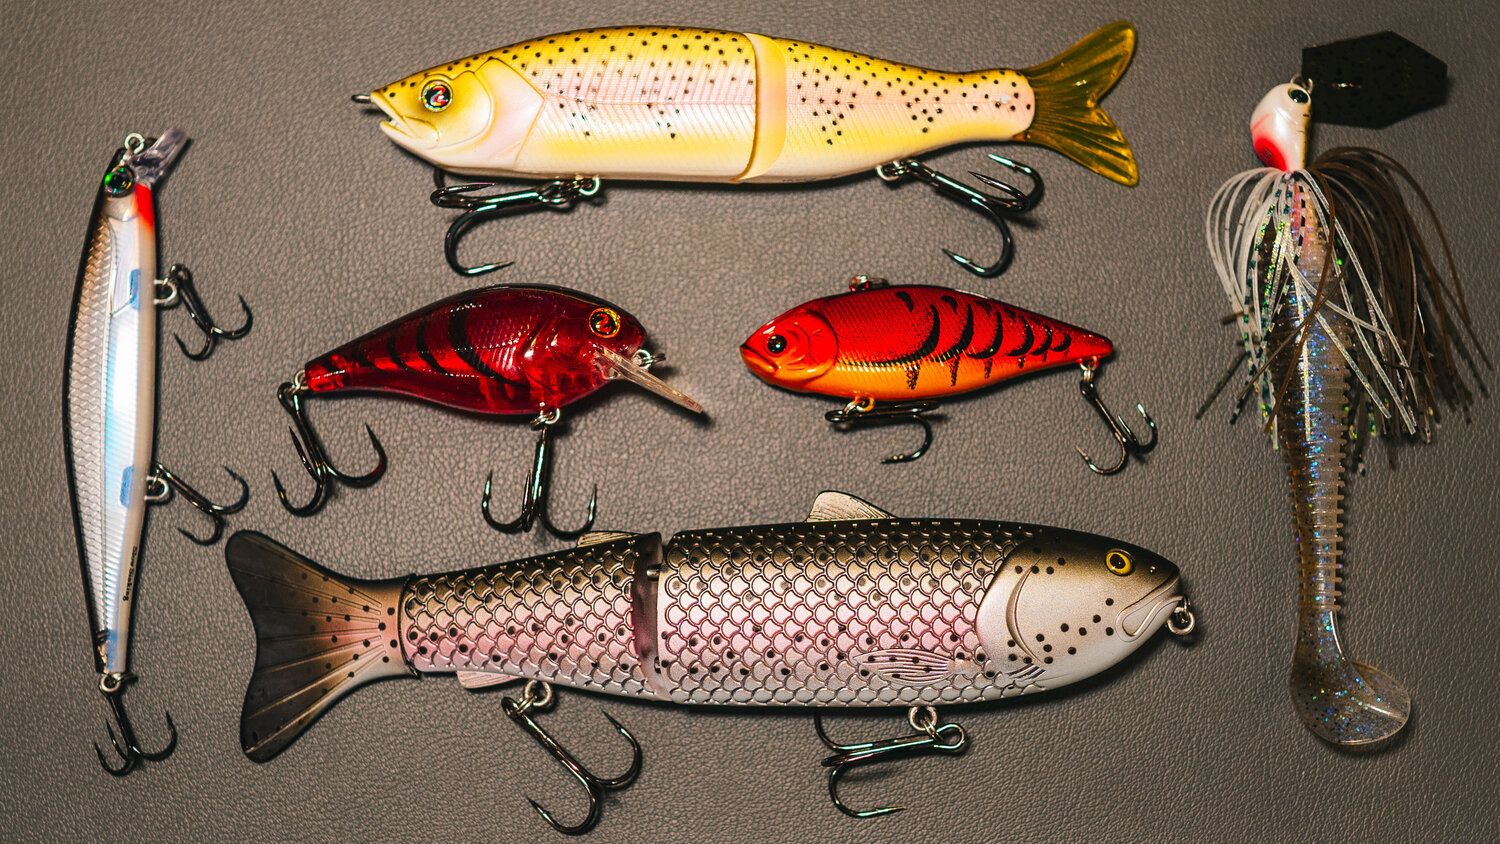 Top 5 Baits For Early Spring Bass Fishing! — Tactical Bassin